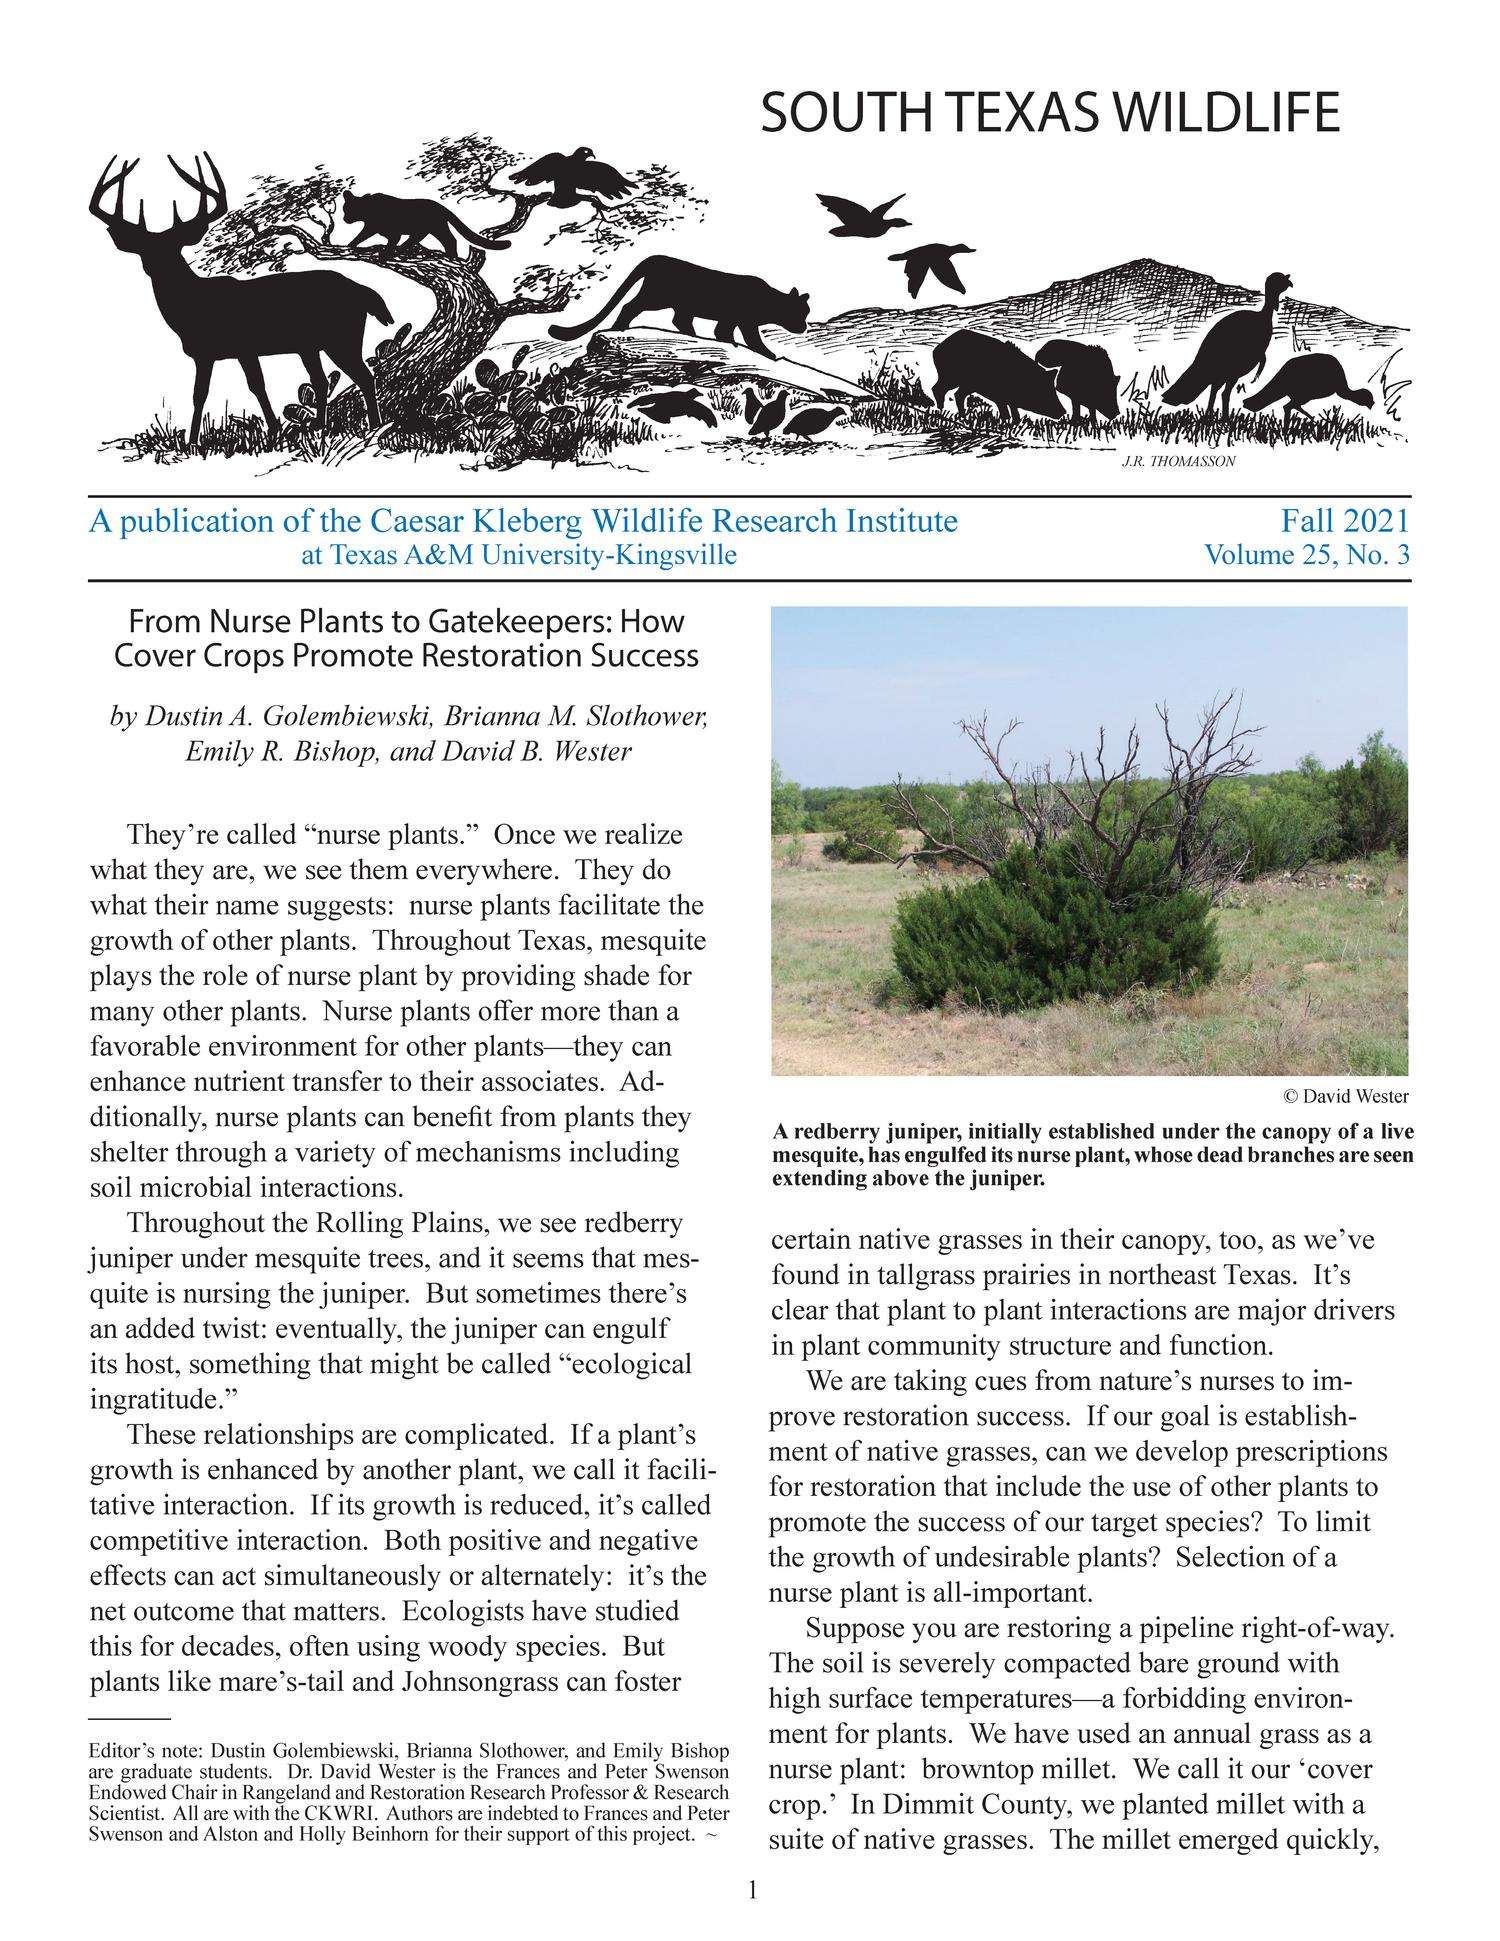 South Texas Wildlife, Volume 25, Number 3, Fall 2021
                                                
                                                    1
                                                